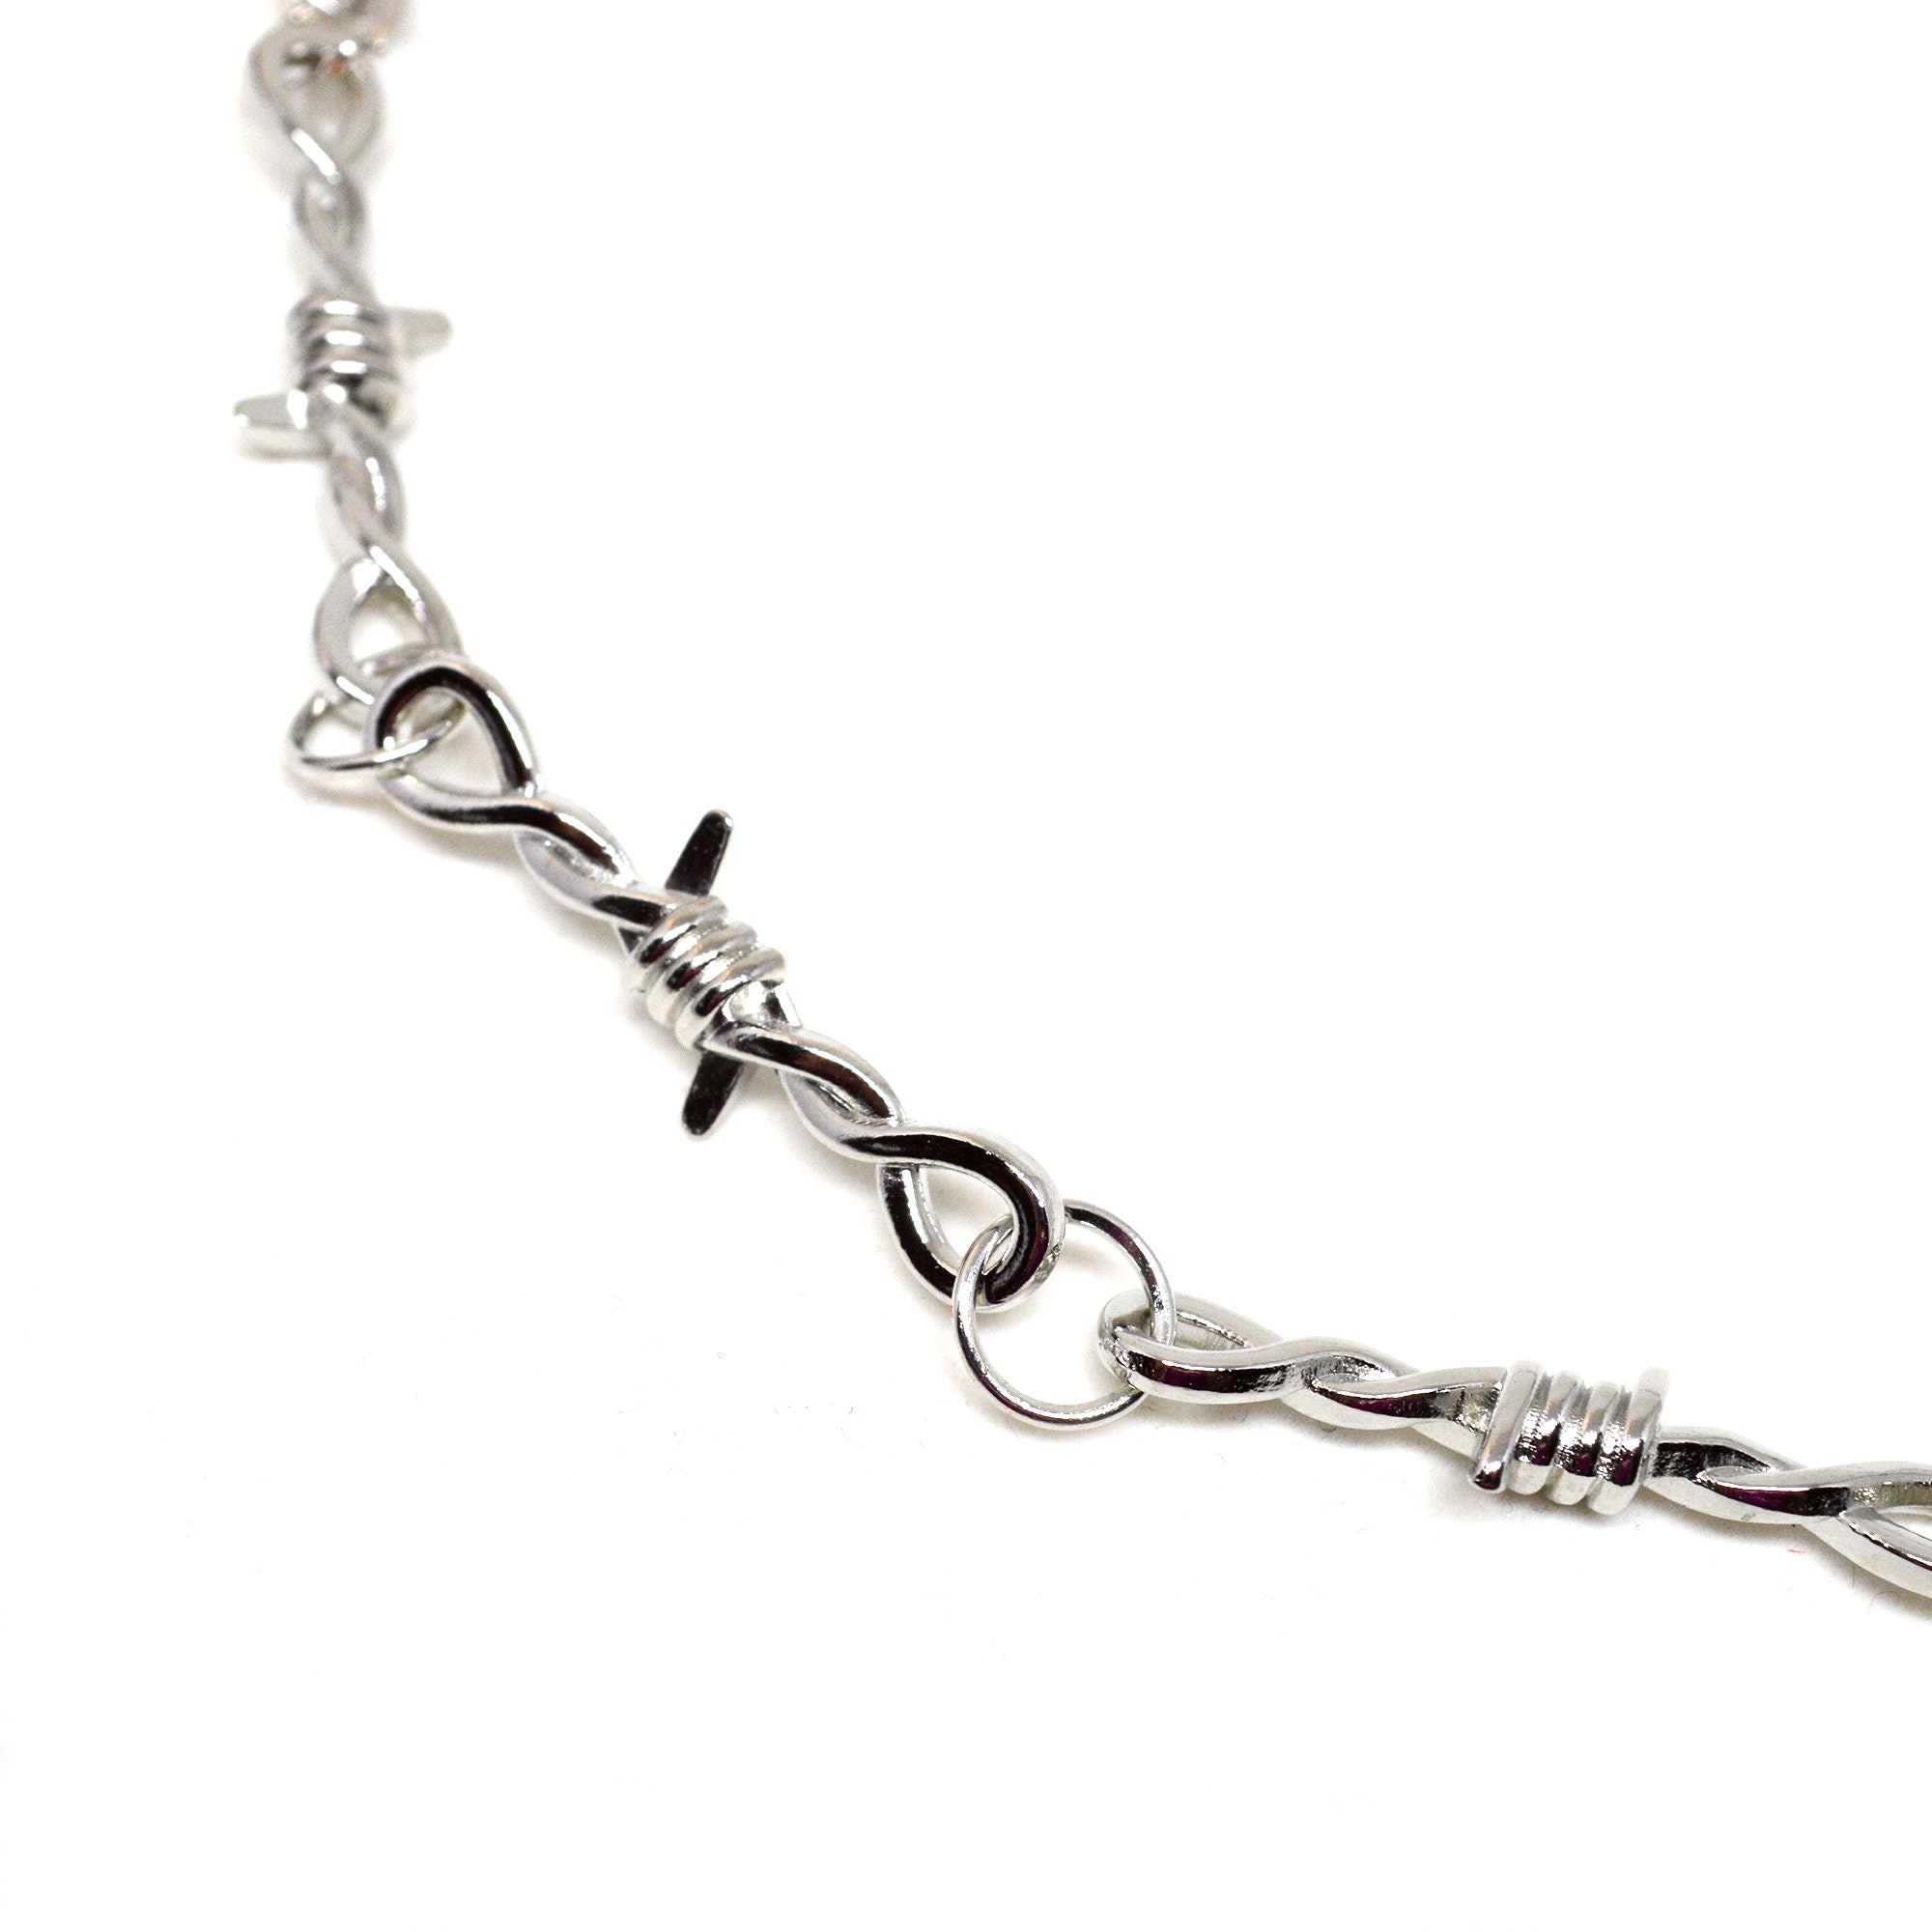 Necklace Punk Style Barbed Wire Chain Cheap JKP4465